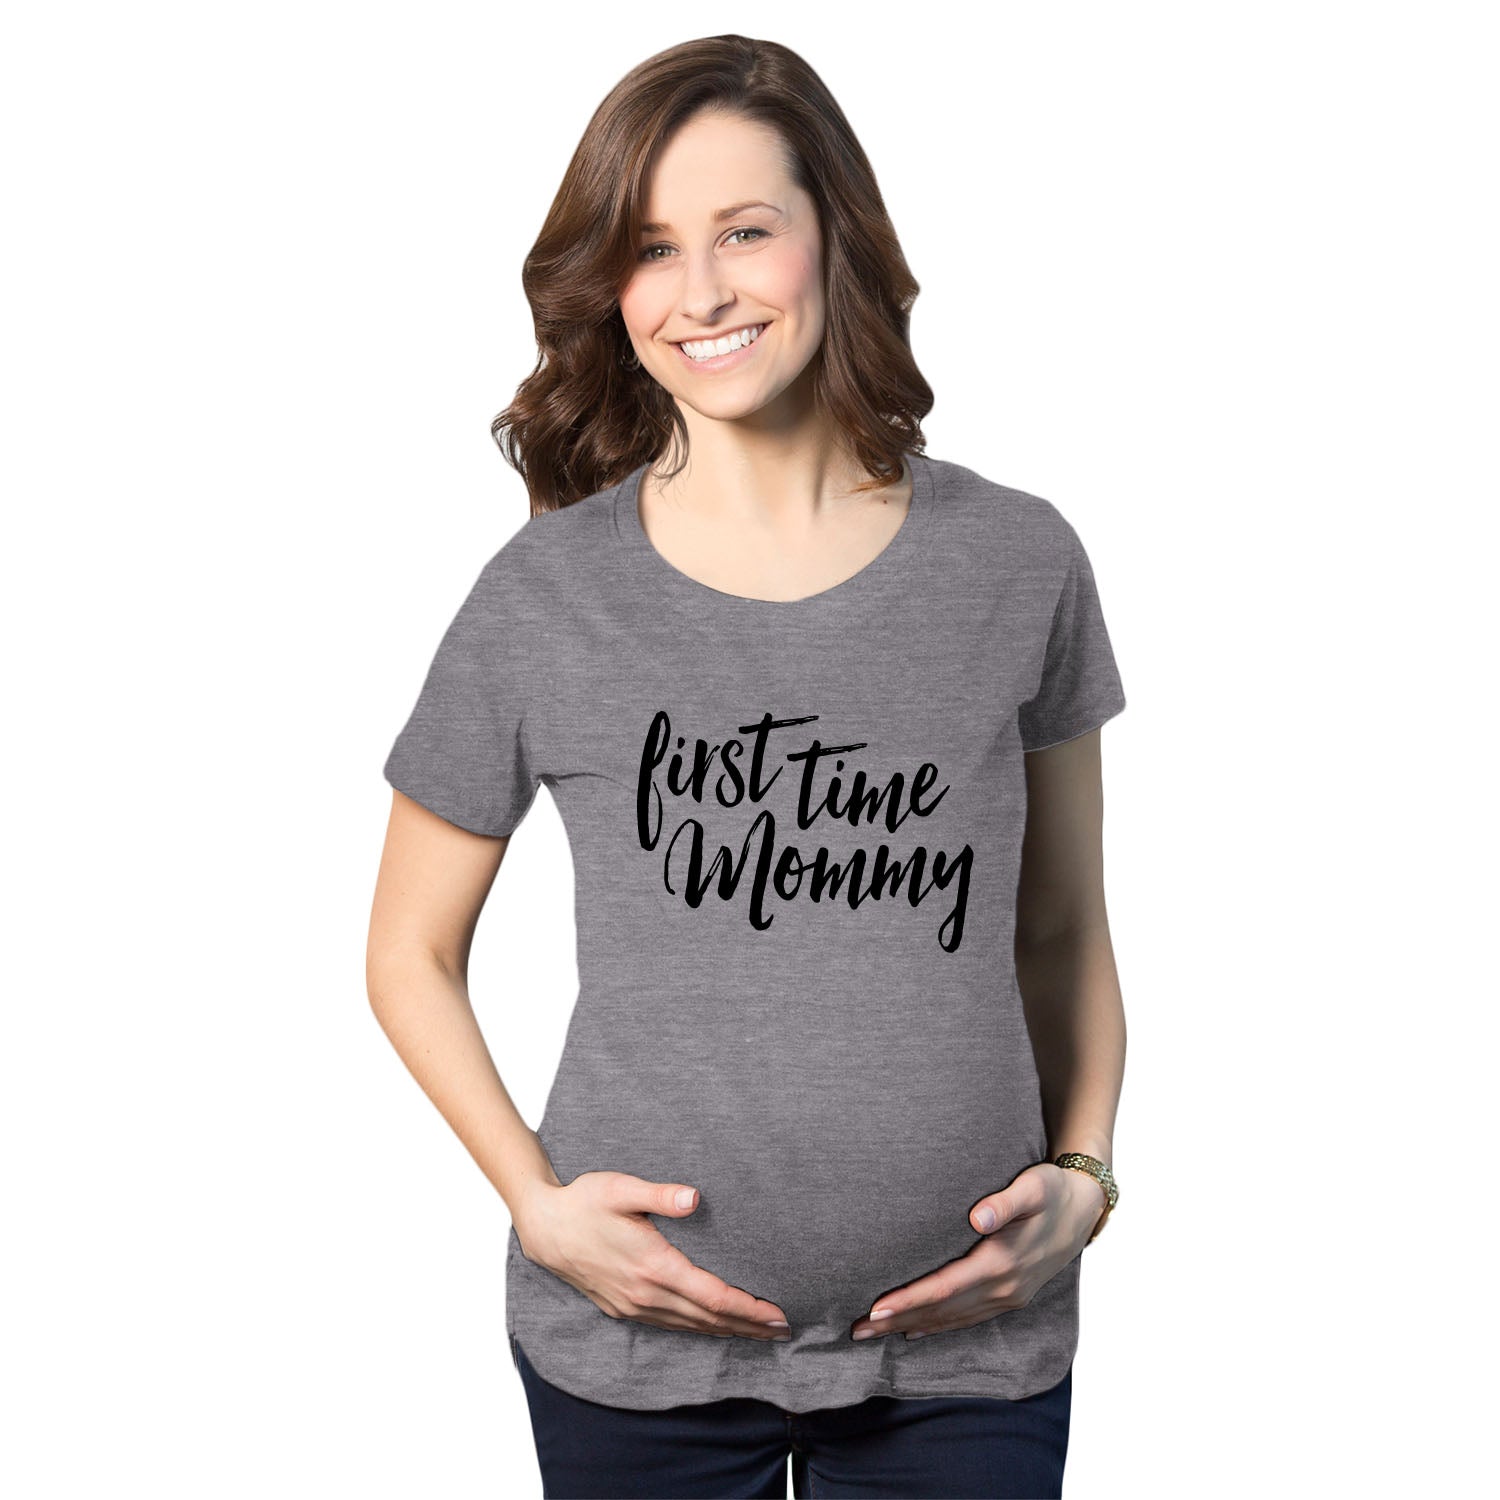 Funny Pregnancy T-shirt Maternity Top WIFI Baby Shower New 